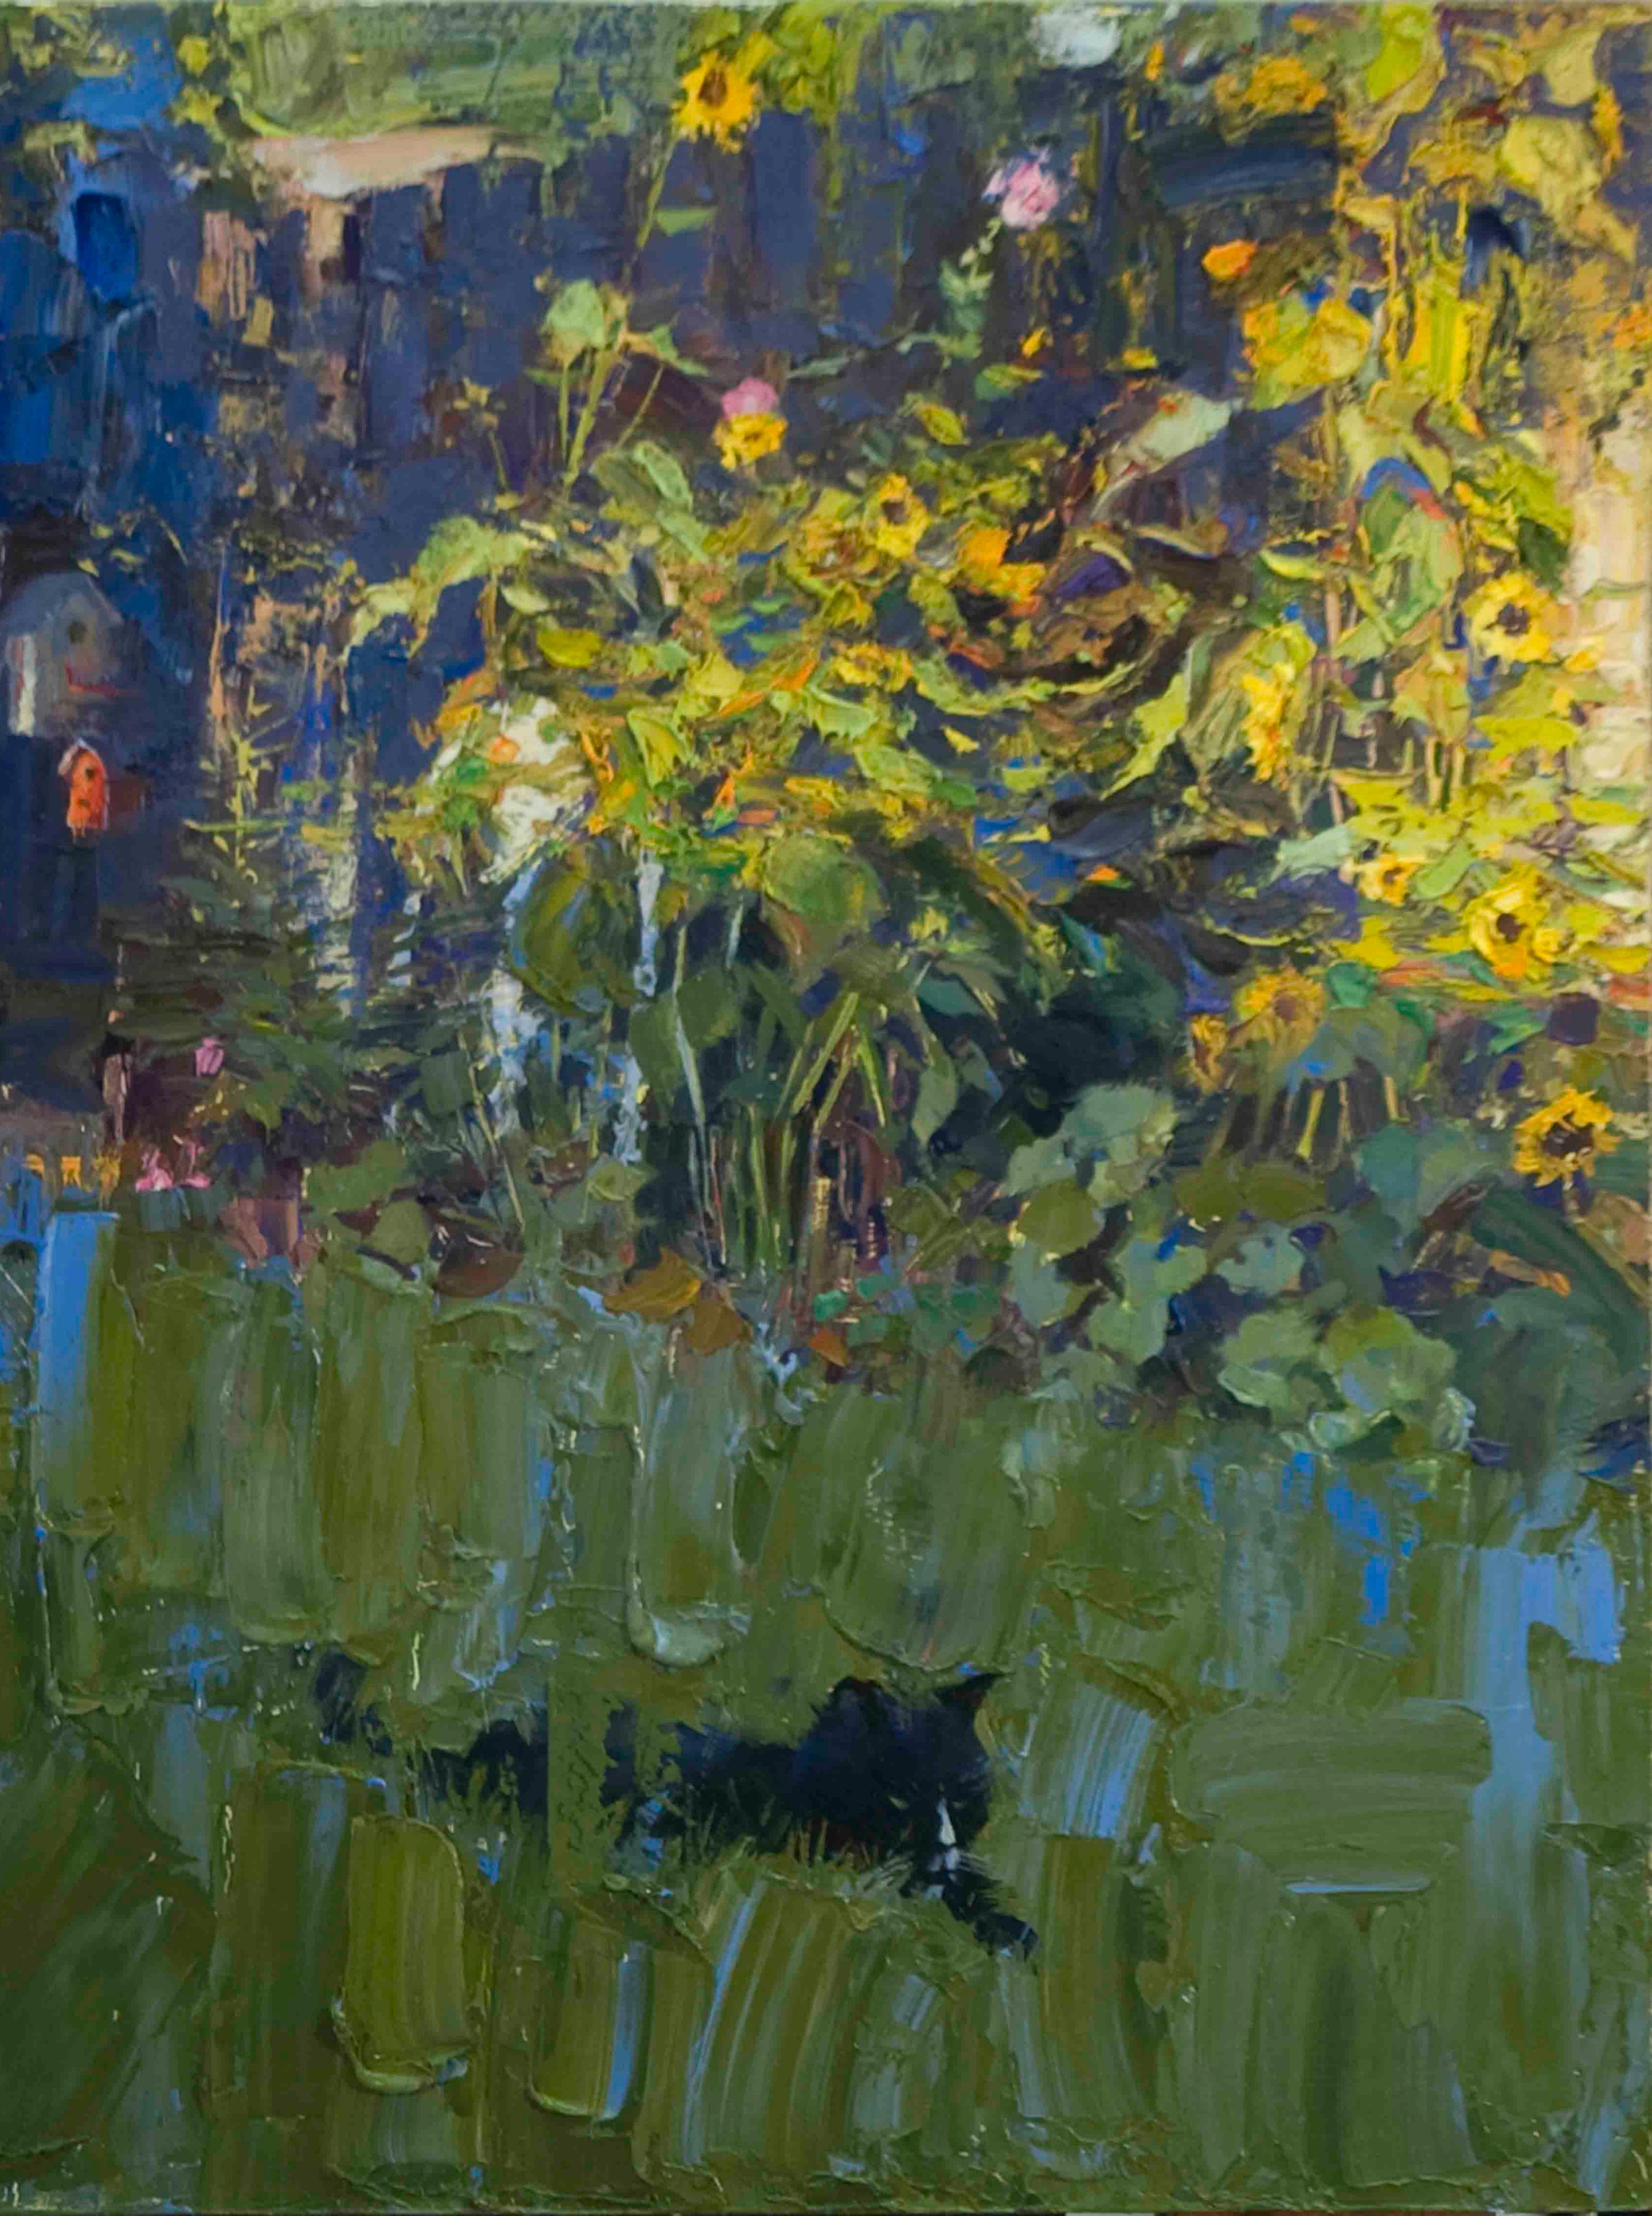 Panther in the Grass is by artist Jeff Slemons   .There is the use of the palette knife which builds up a texture of the oil paints used in this landscape/animal painting. Wild cats that have a dark (melanistic) color are often referred to as